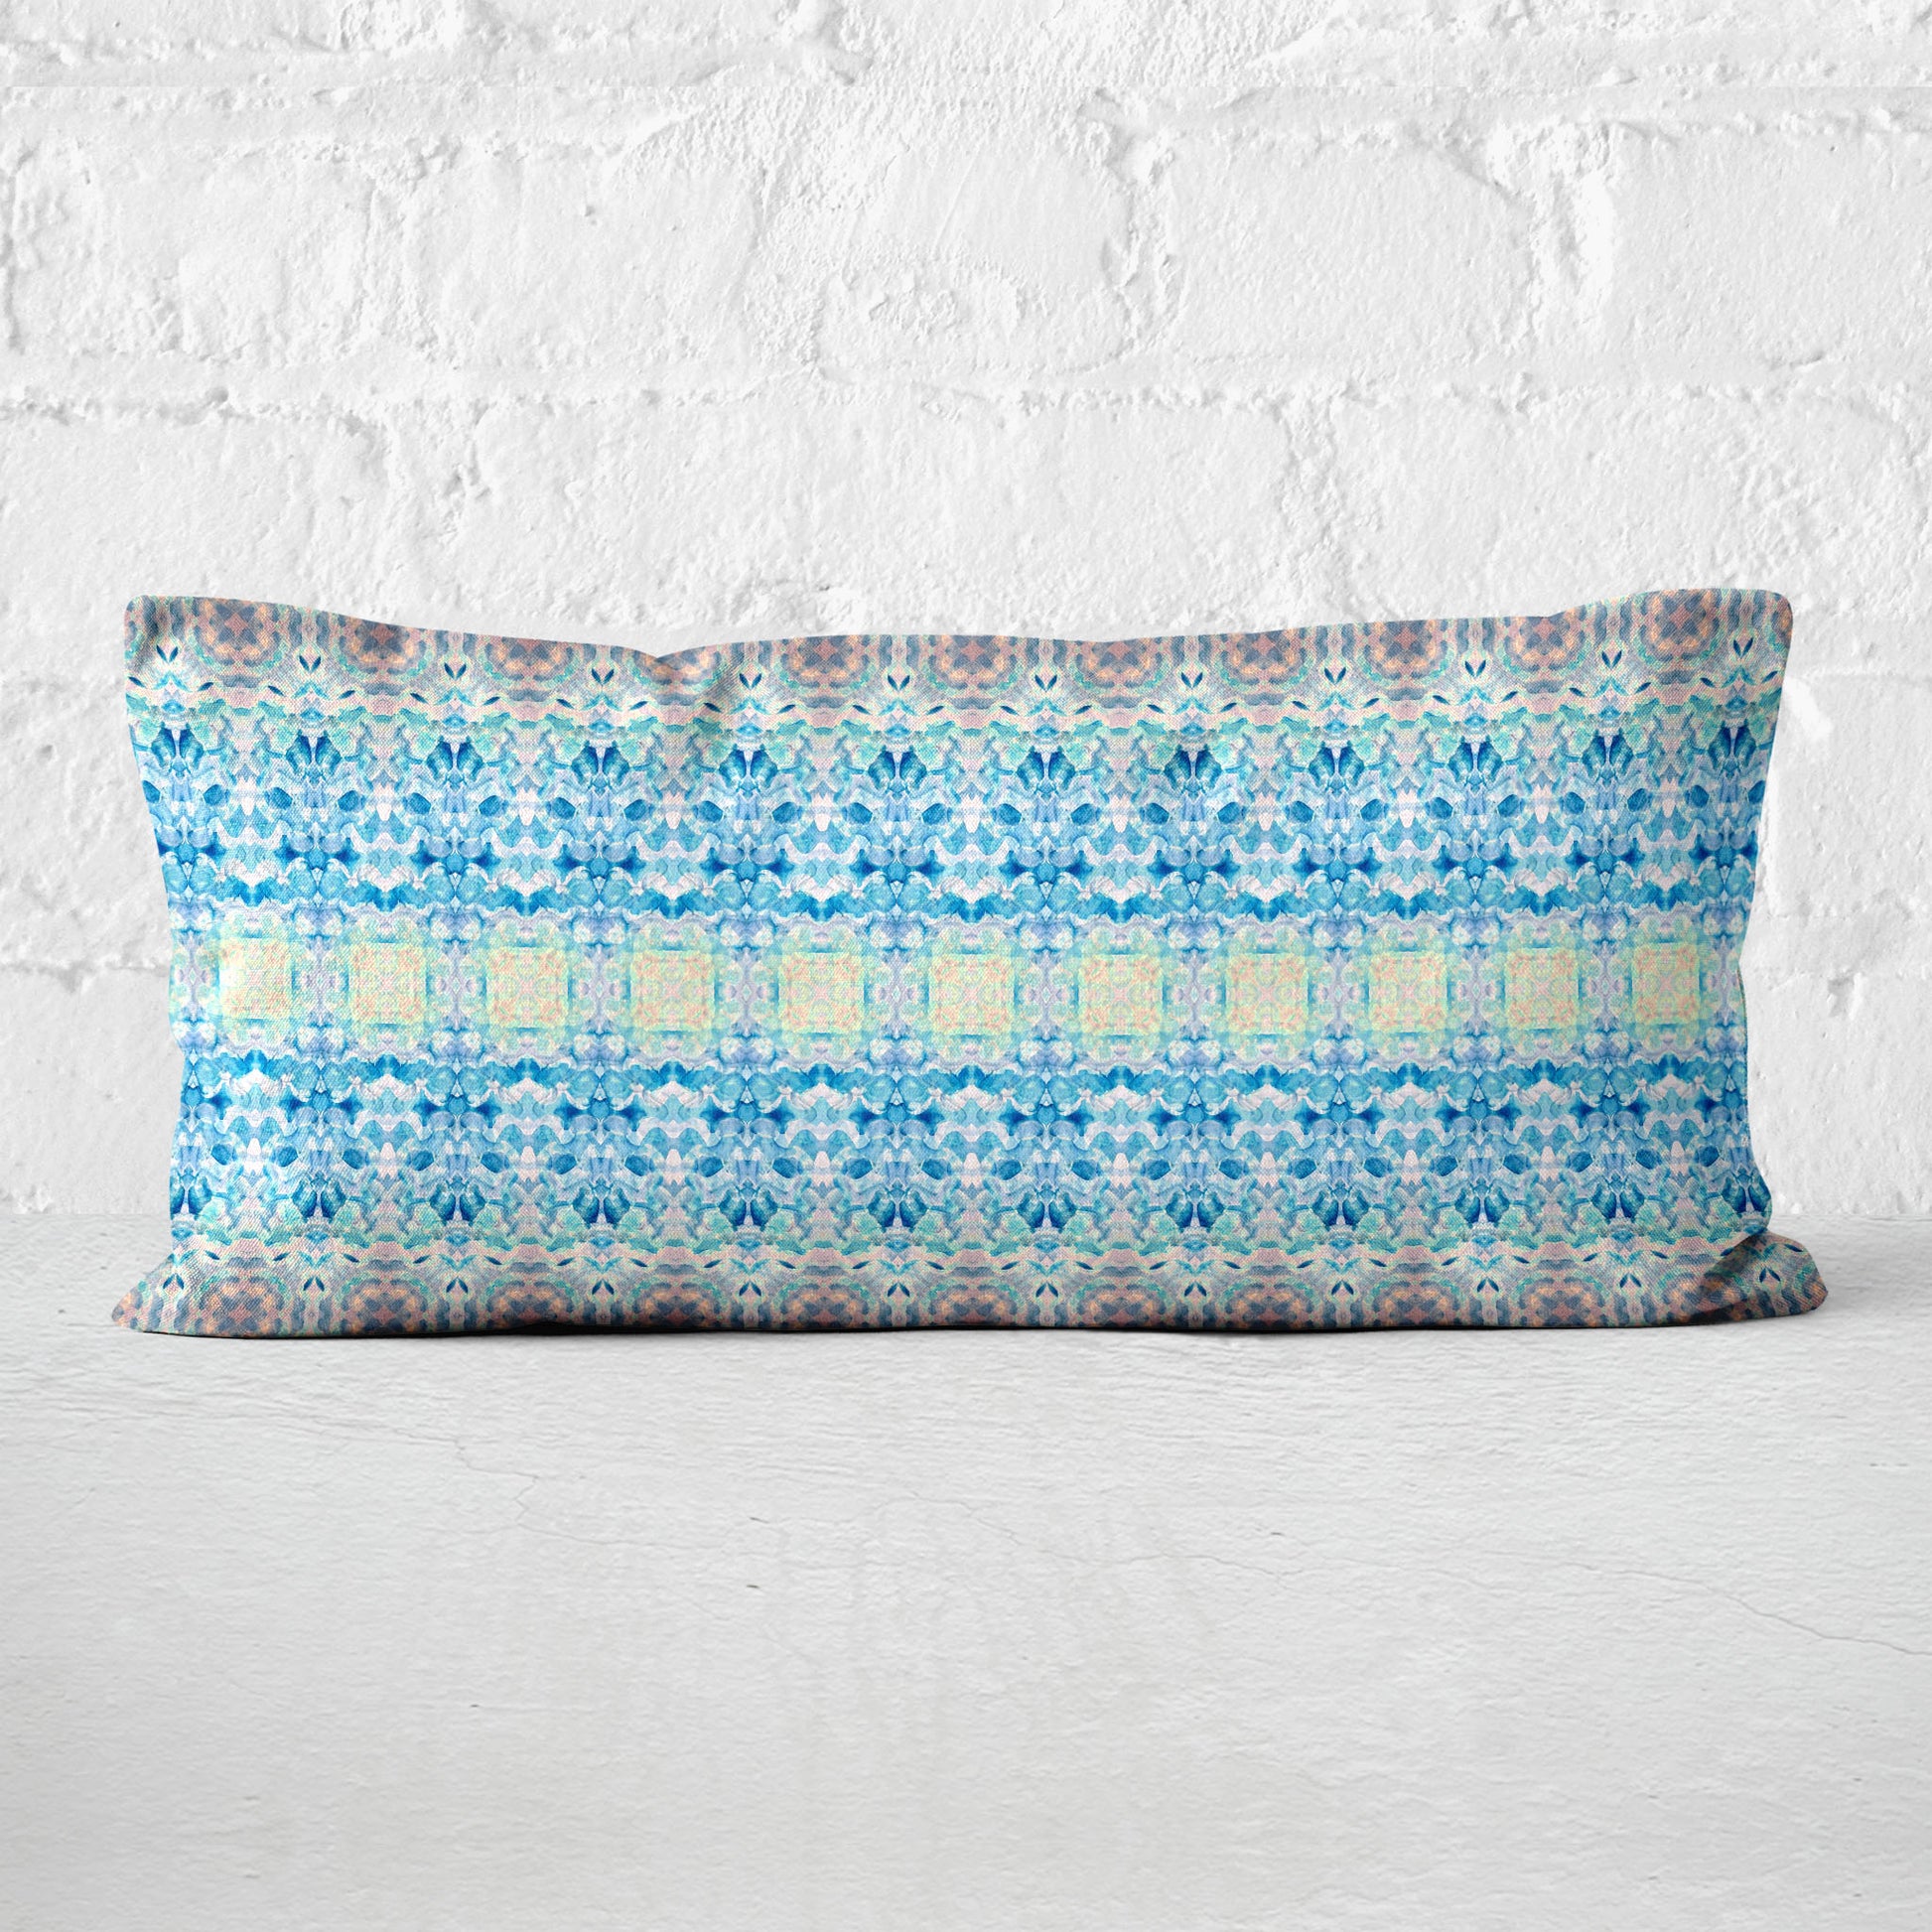 Rectangular lumbar pillow featuring a handpainted pattern in blue, pink, and yellow leaning against a white brick wall.